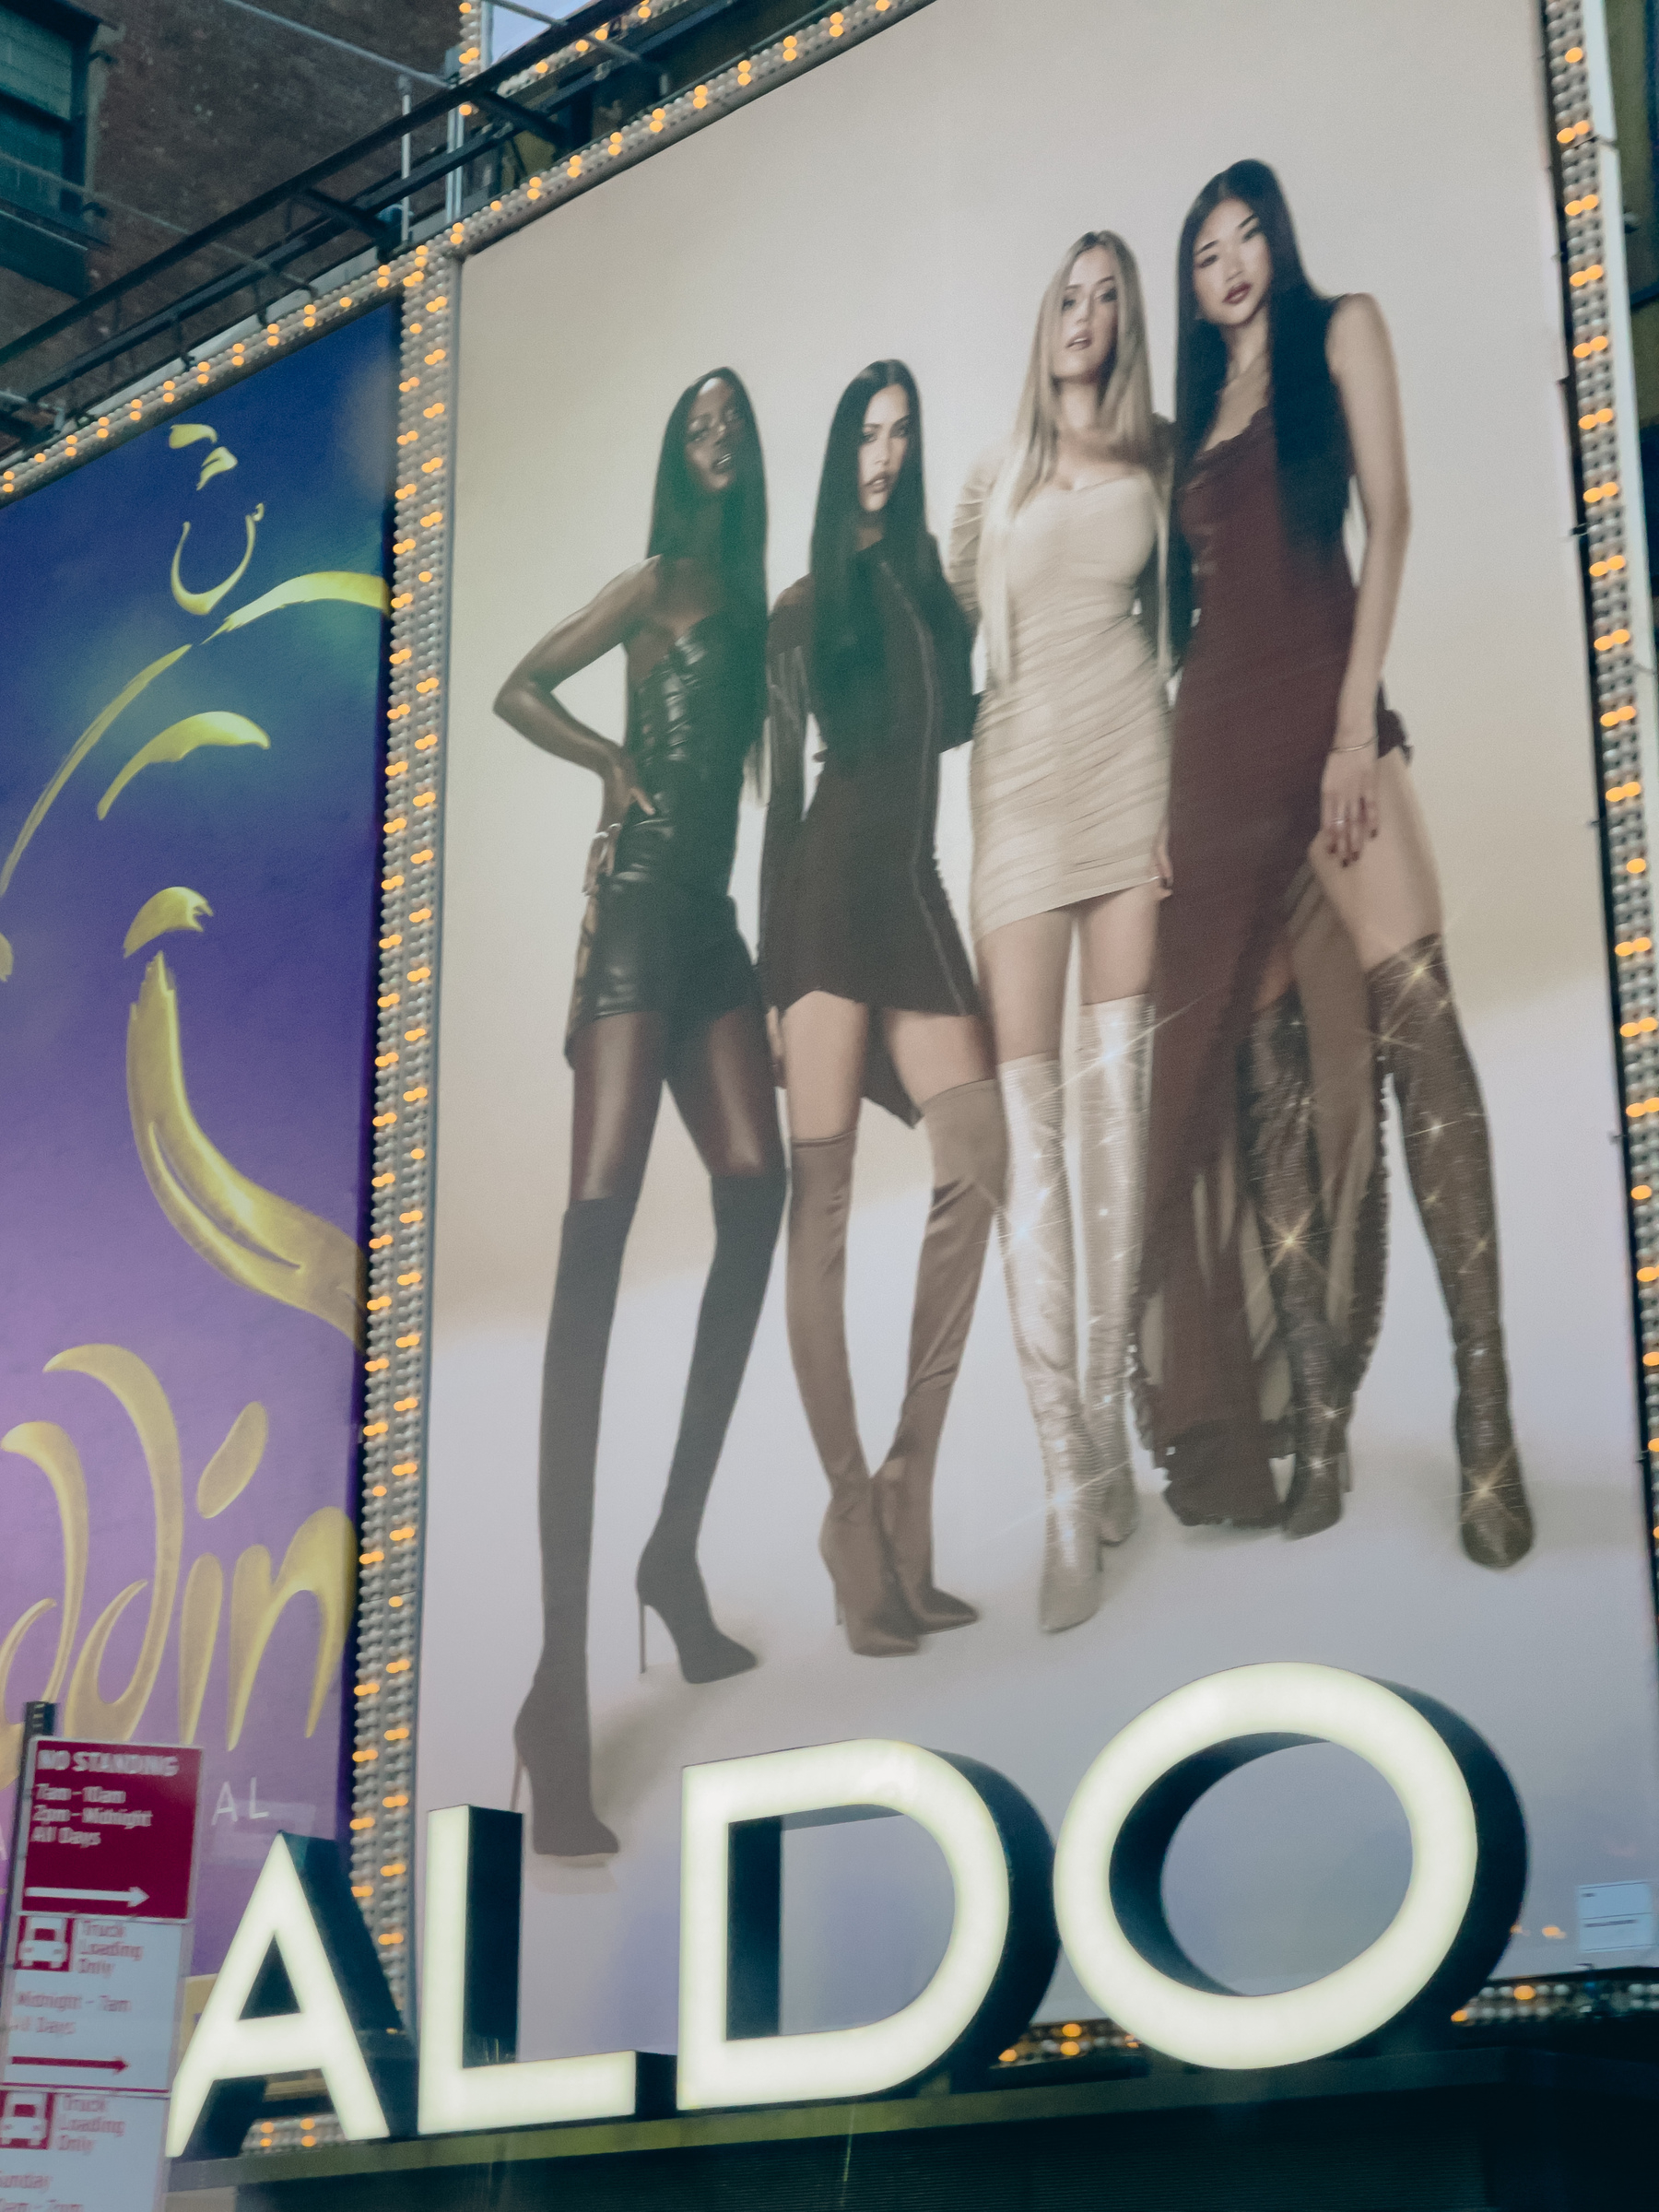 Electronic billboard with 4 women models wearing mini dresses, and ALDO in 3D letters at bottom.